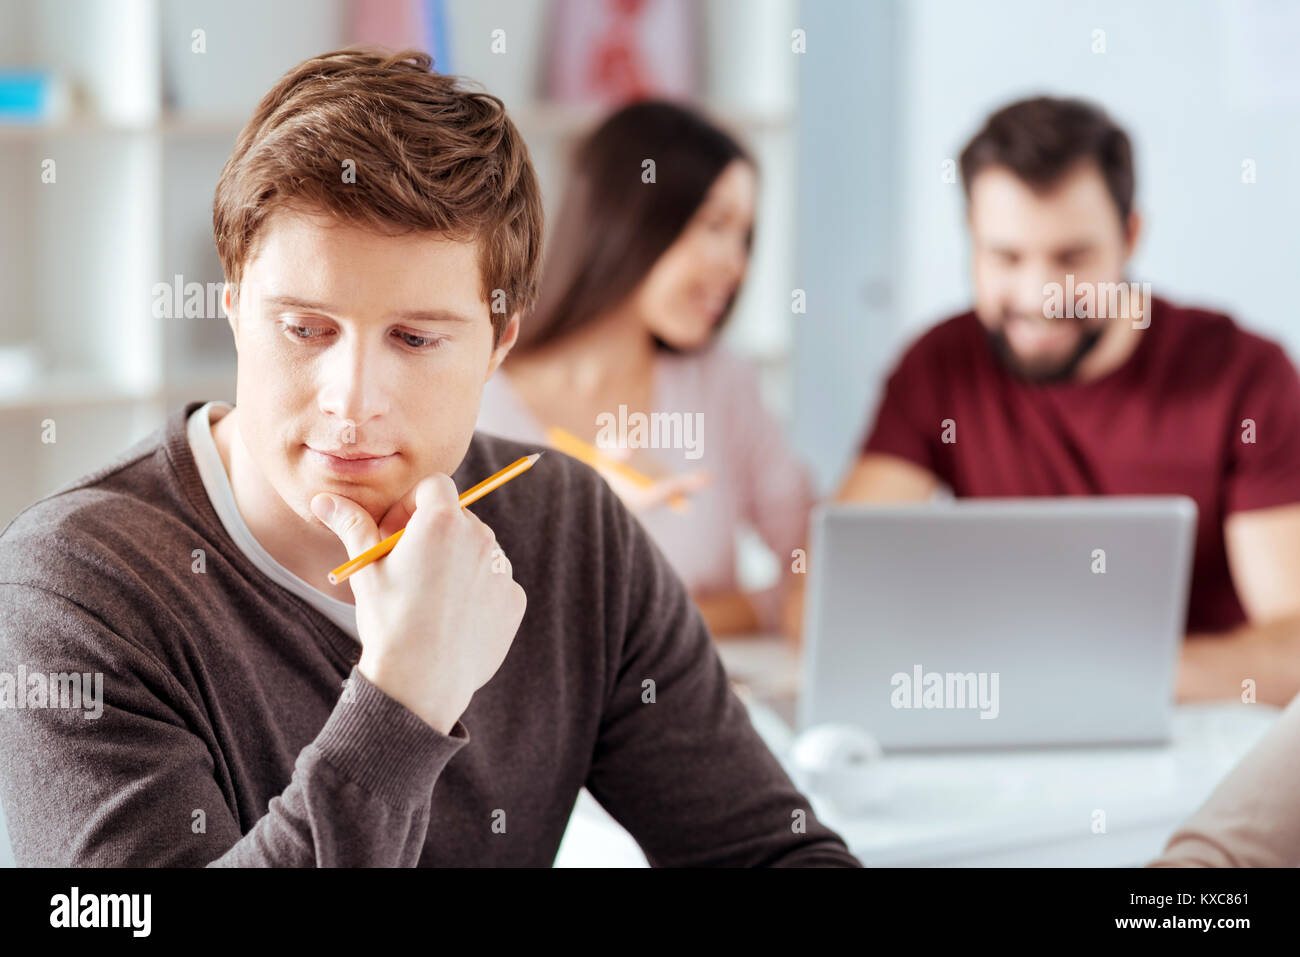 Pensive reflecting guy confronting problem Stock Photo